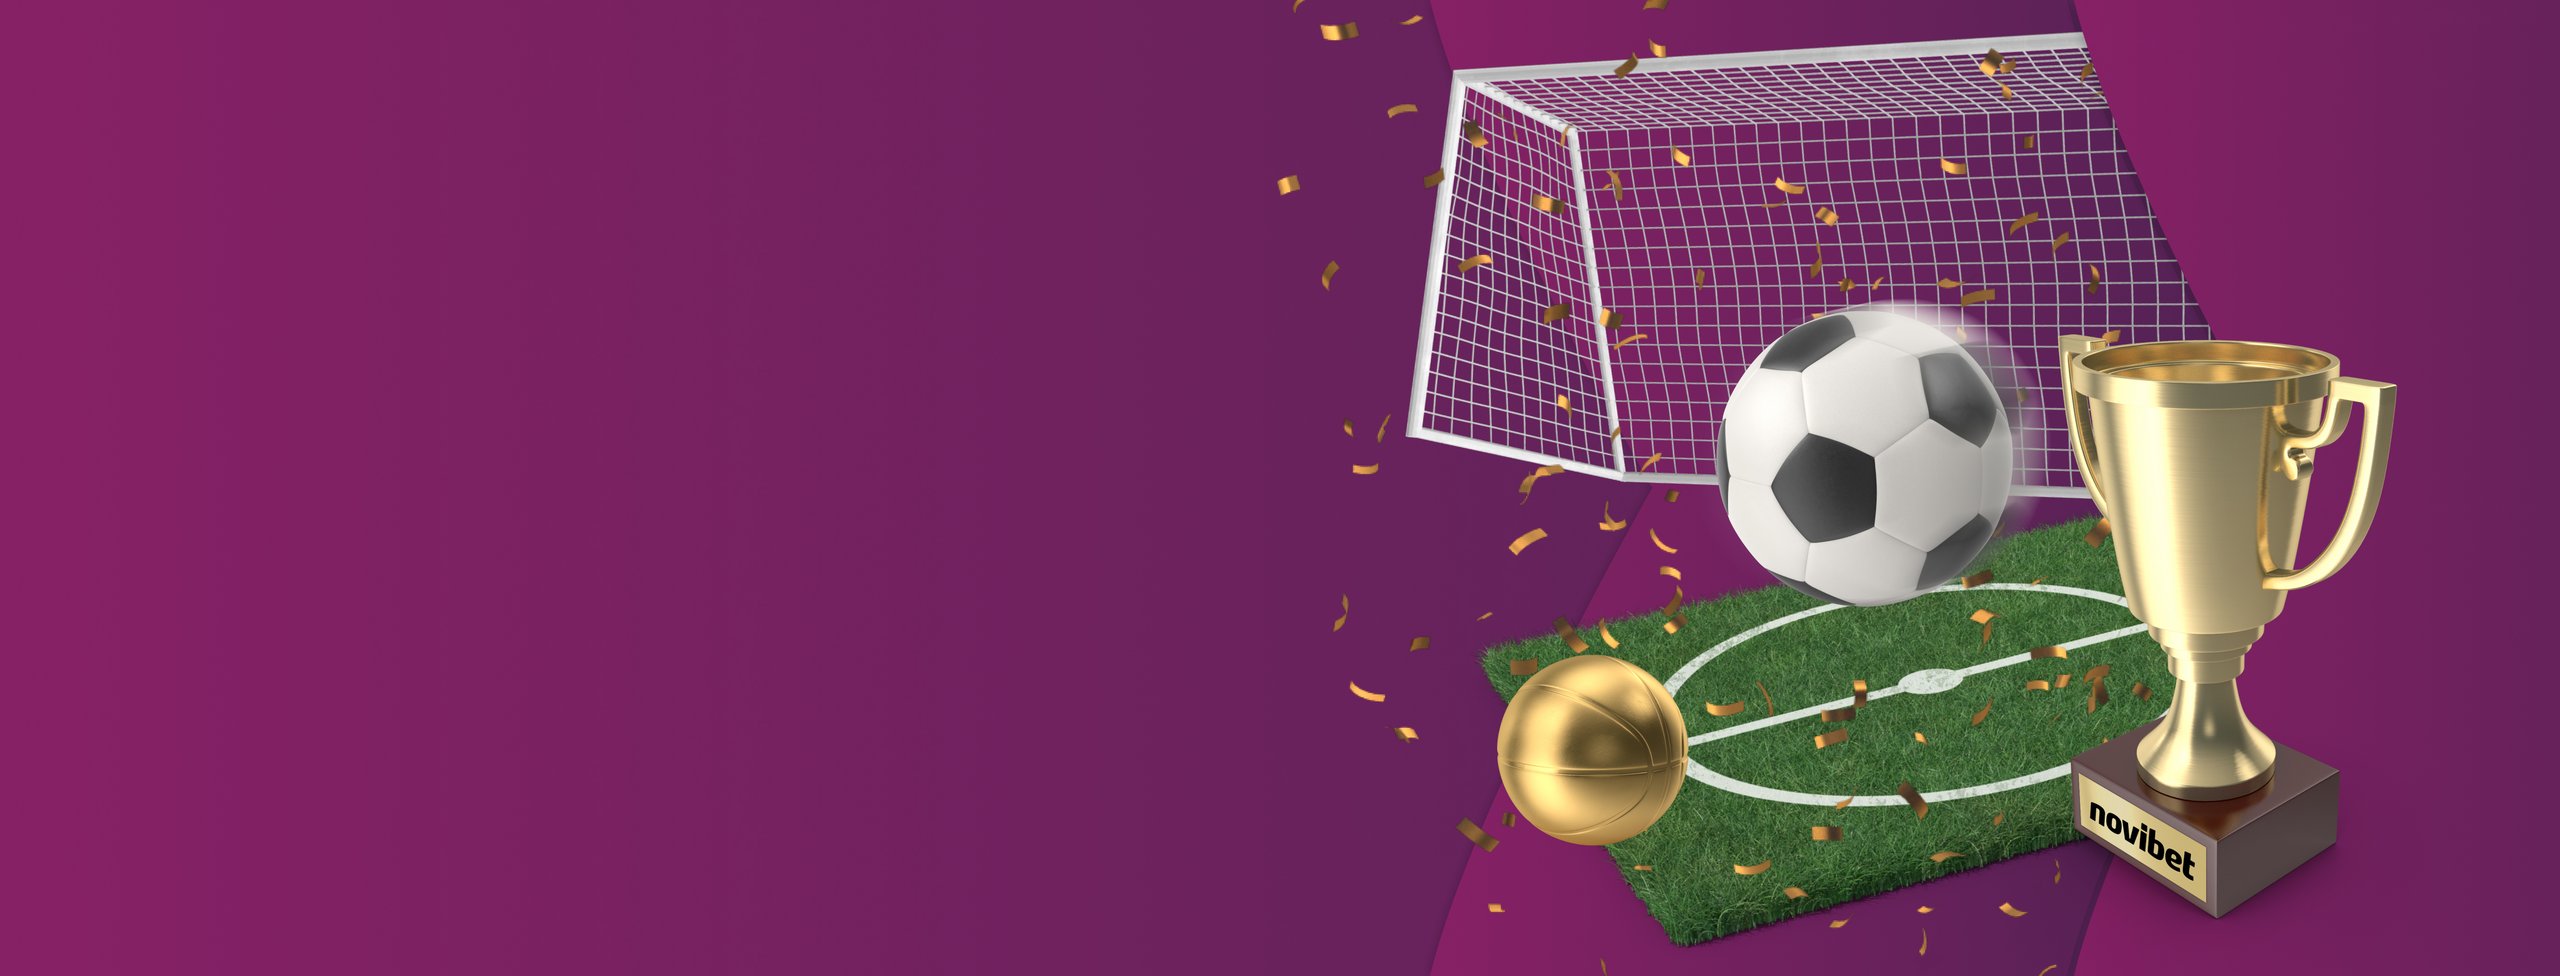 A golden football trophy on a purple background